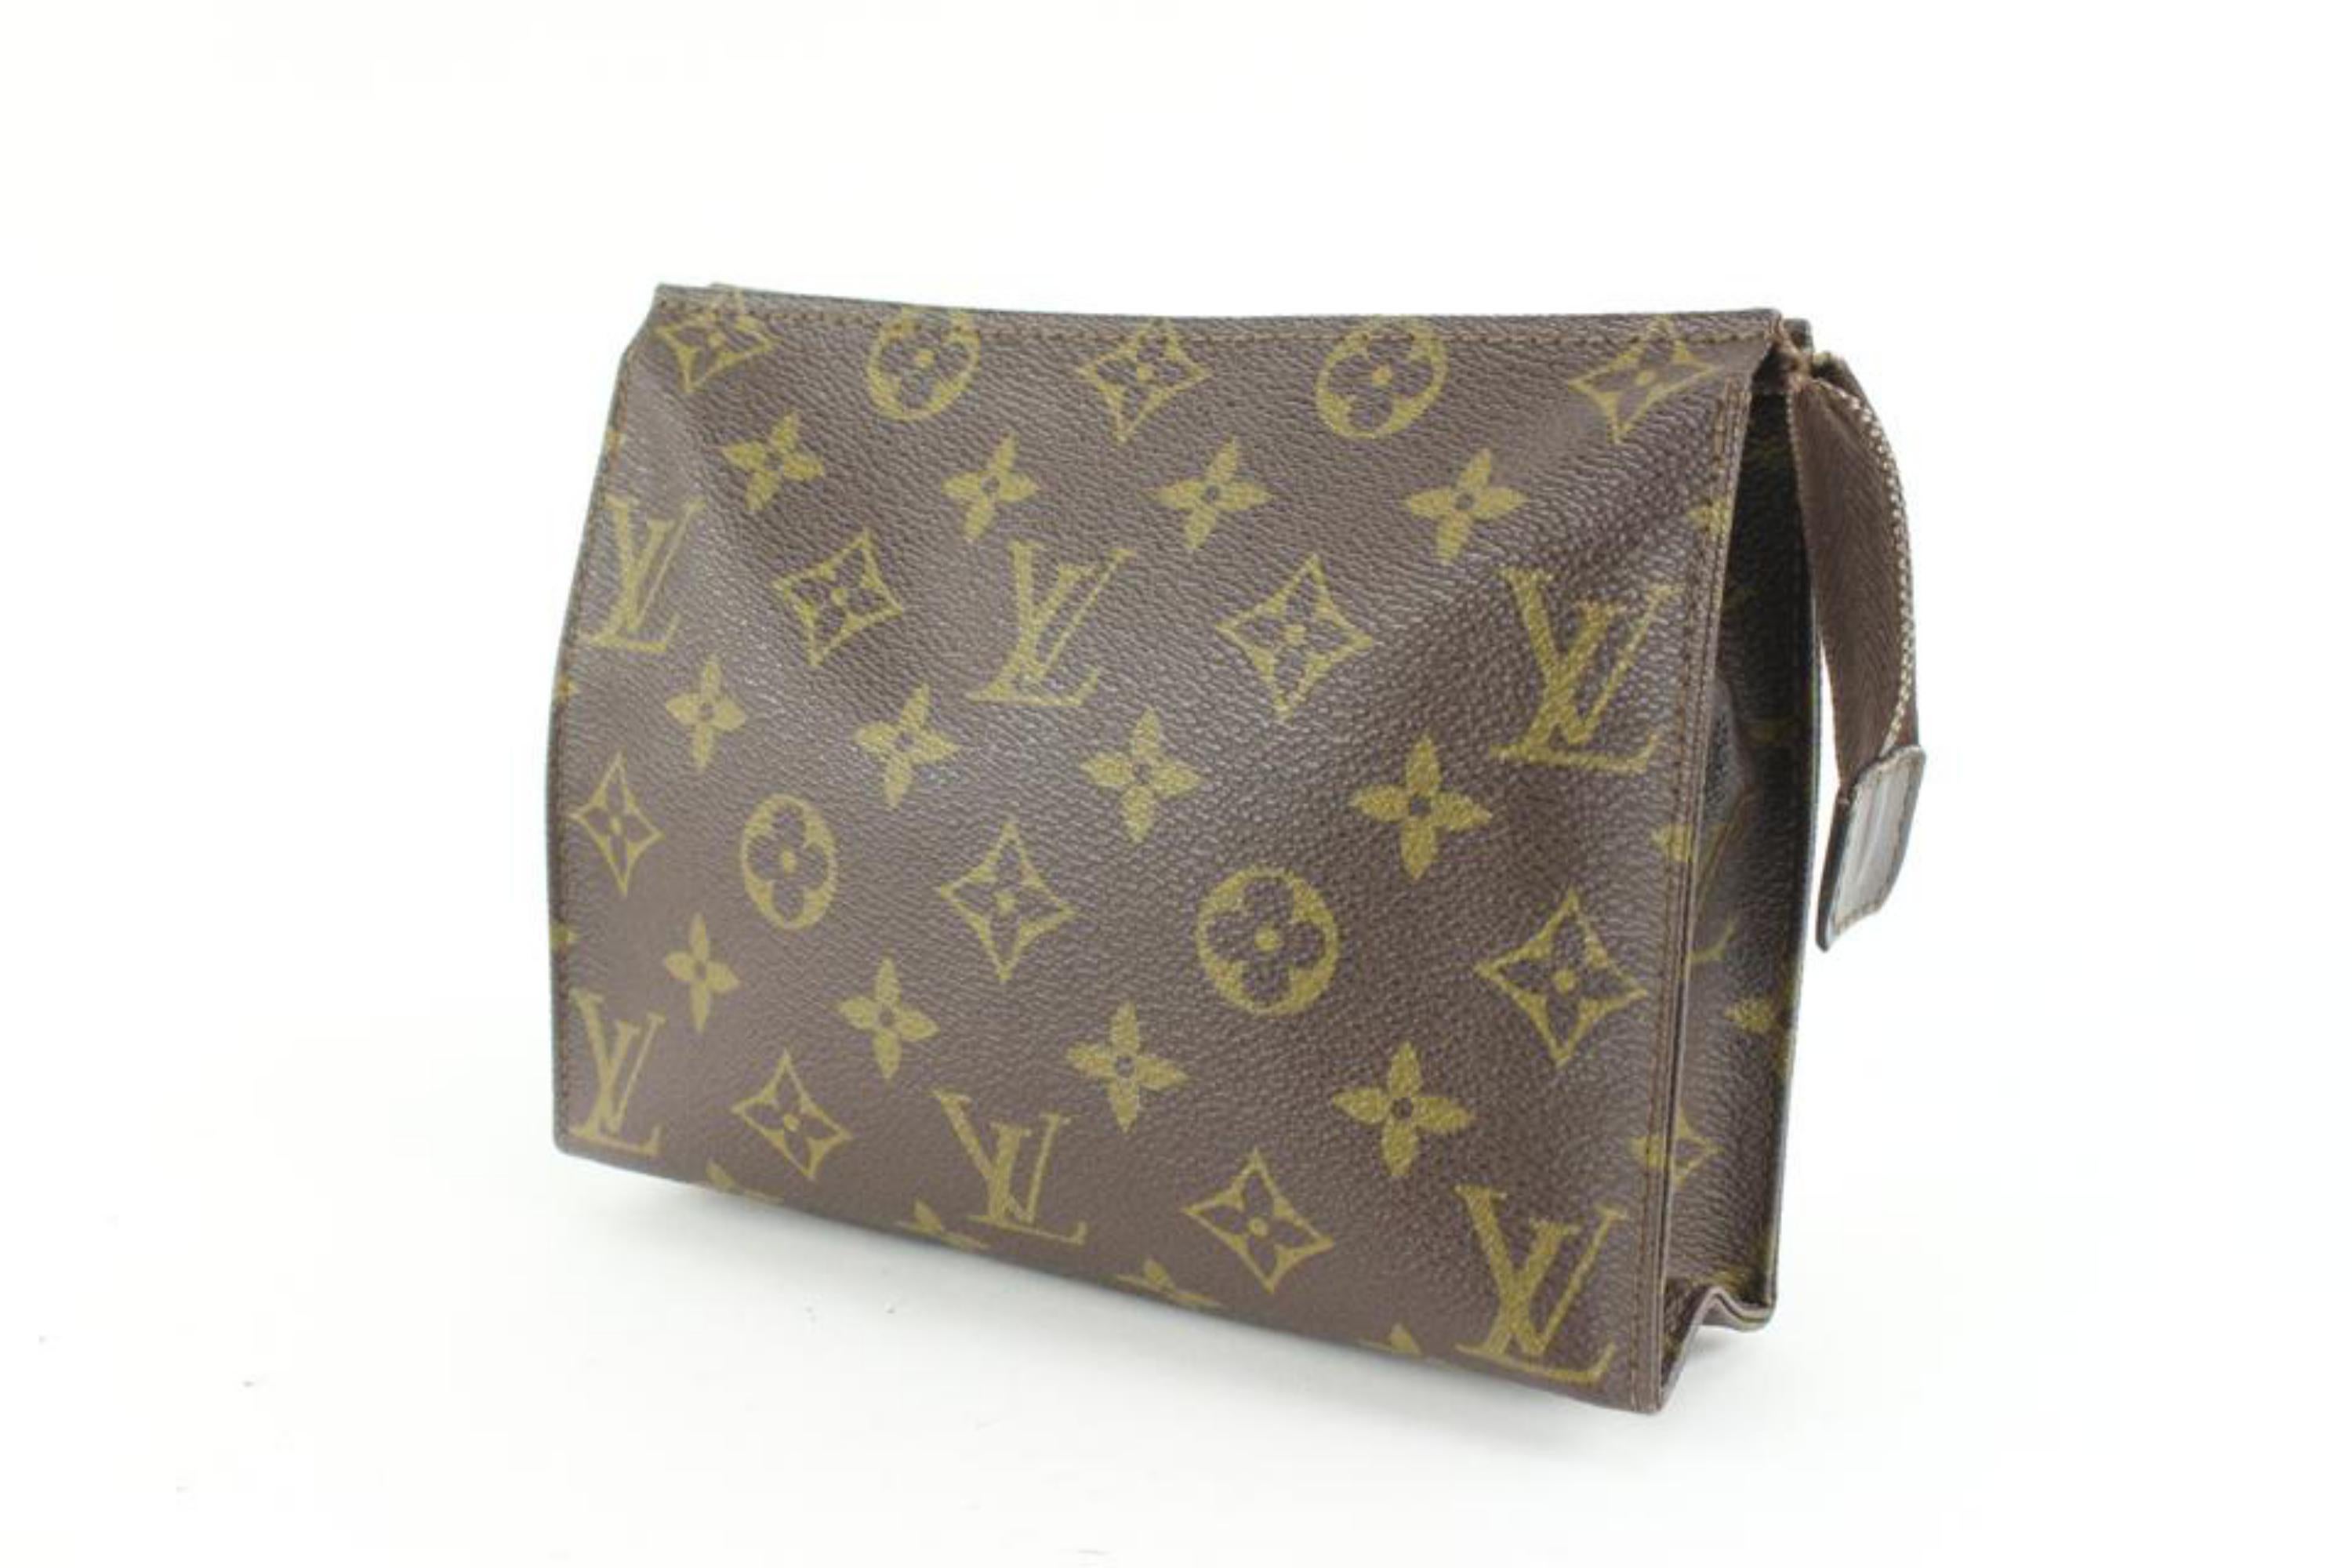 Louis Vuitton Monogram Toiletry Pouch 19 Poche Toilette Cosmetic Case 16lv24
Date Code/Serial Number: 824
Made In: France
Measurements: Length:  7.5